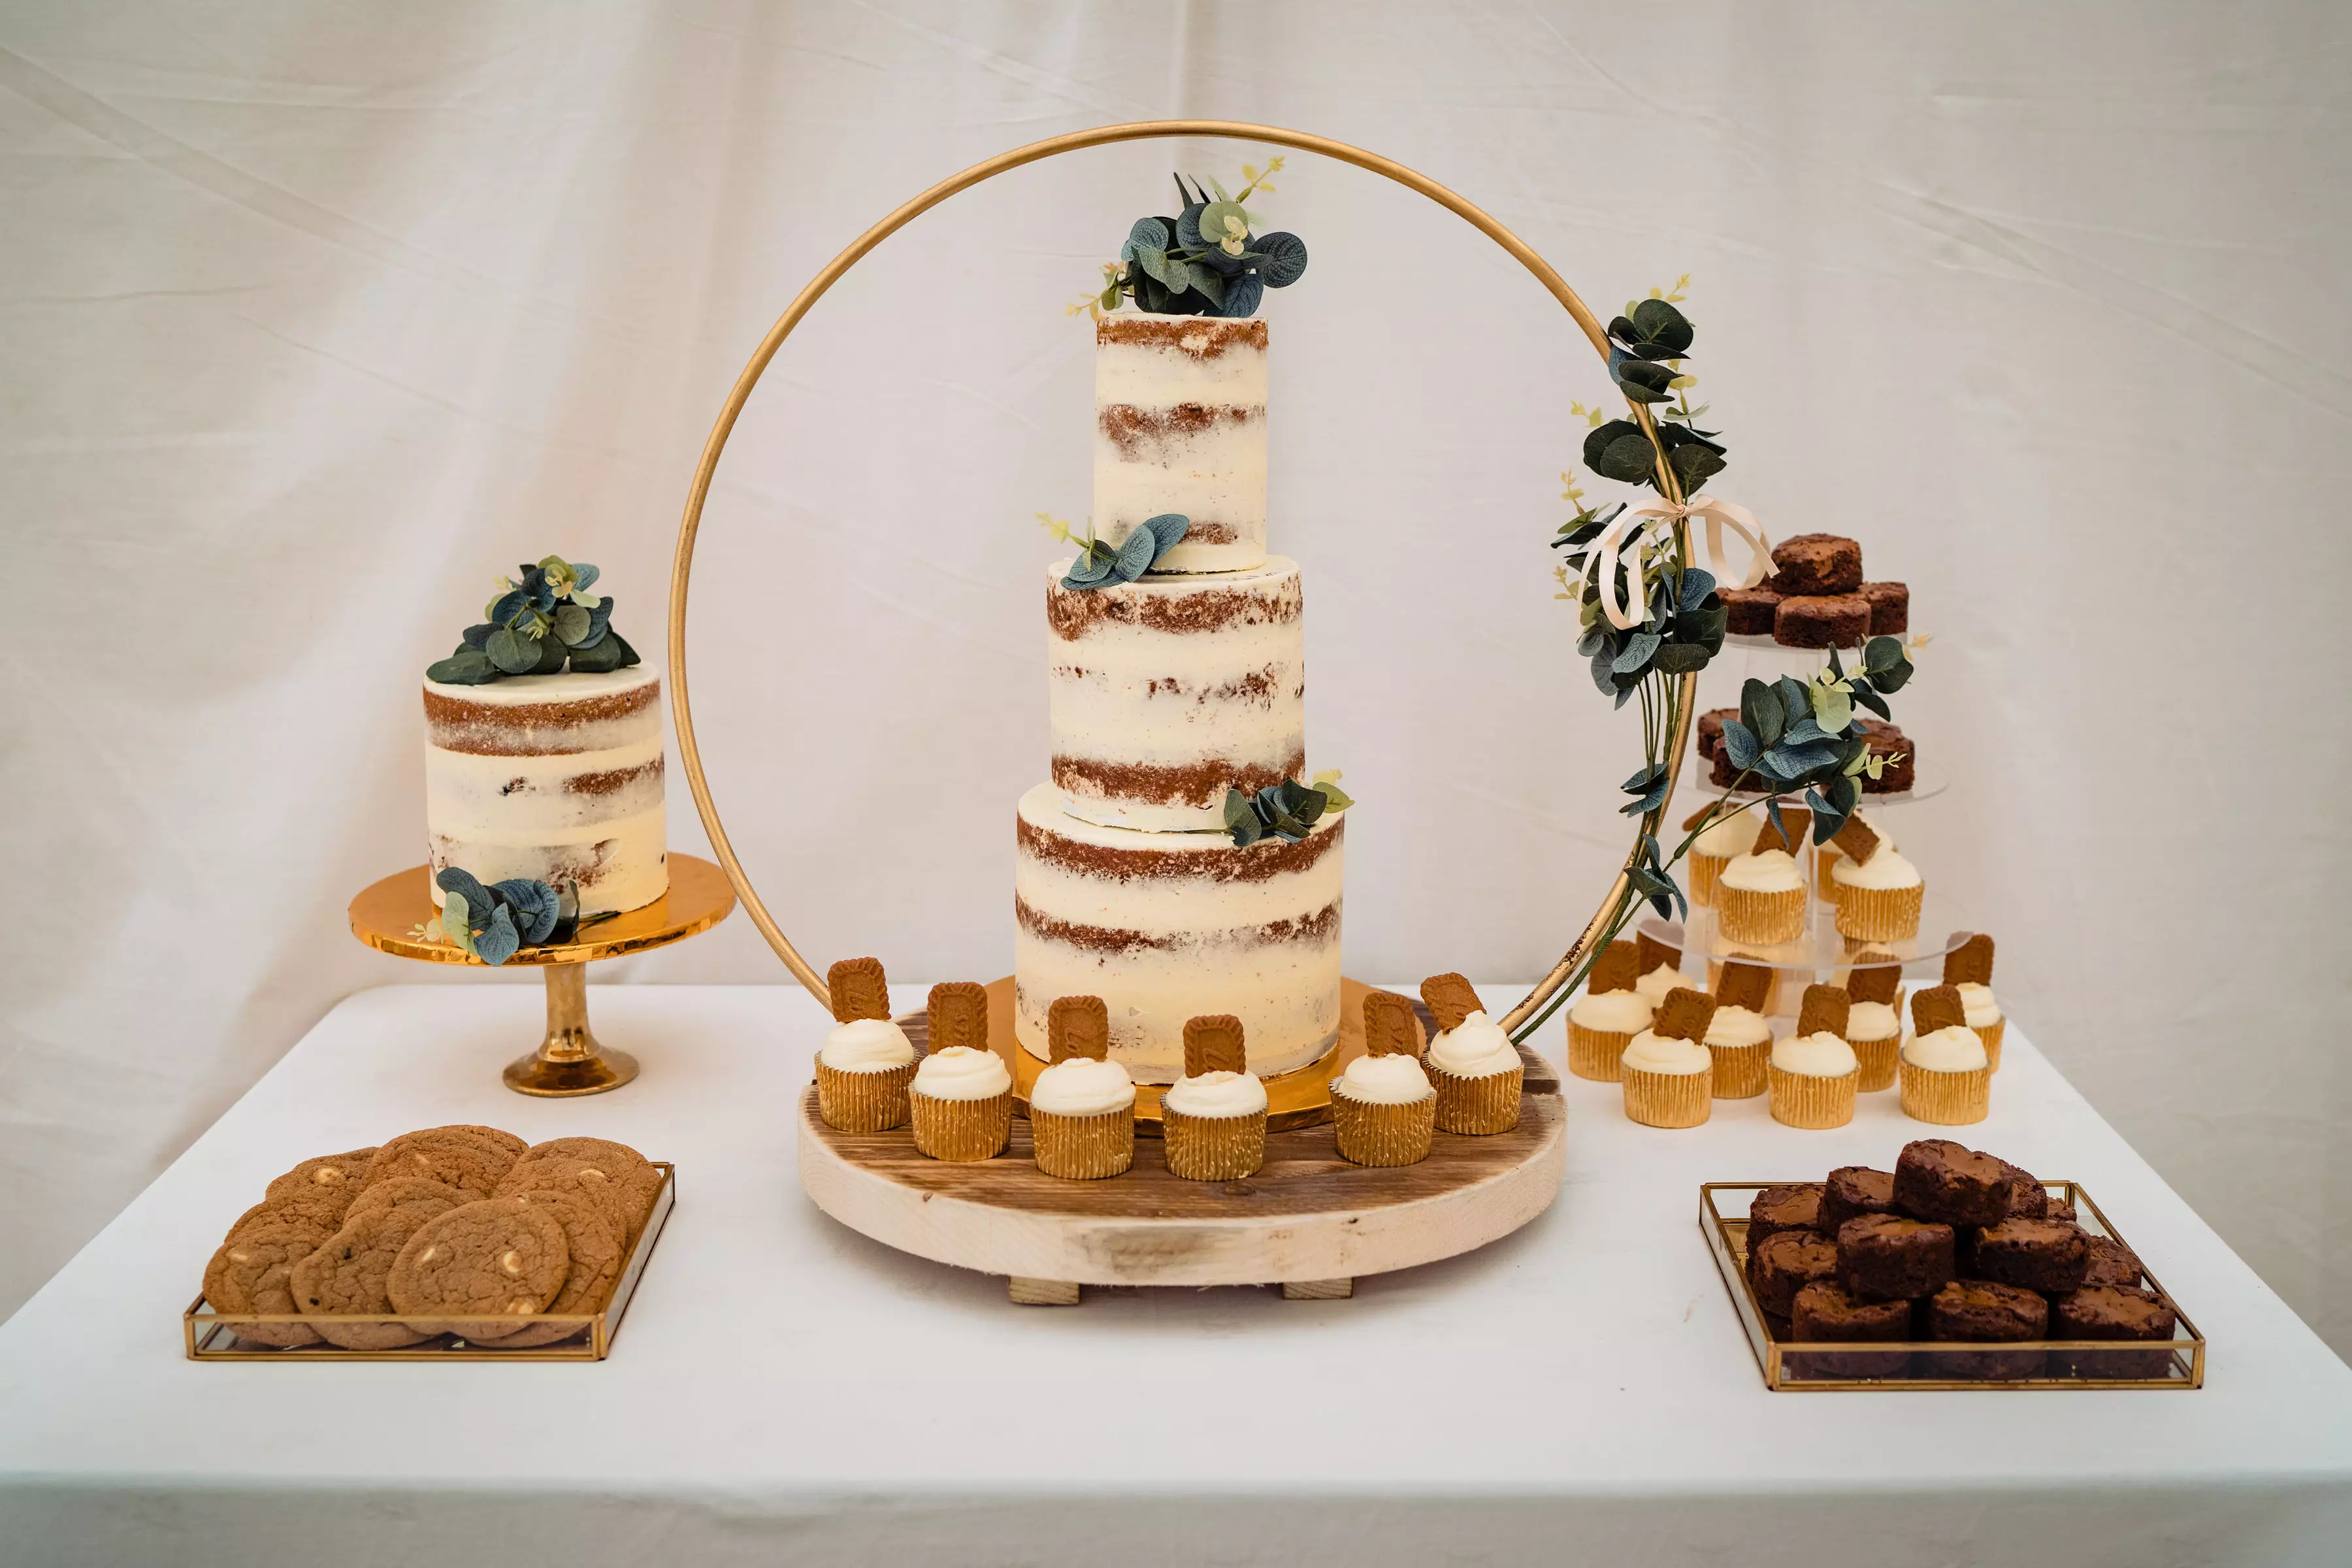 Even the wedding cake and snacks were Biscoff themed